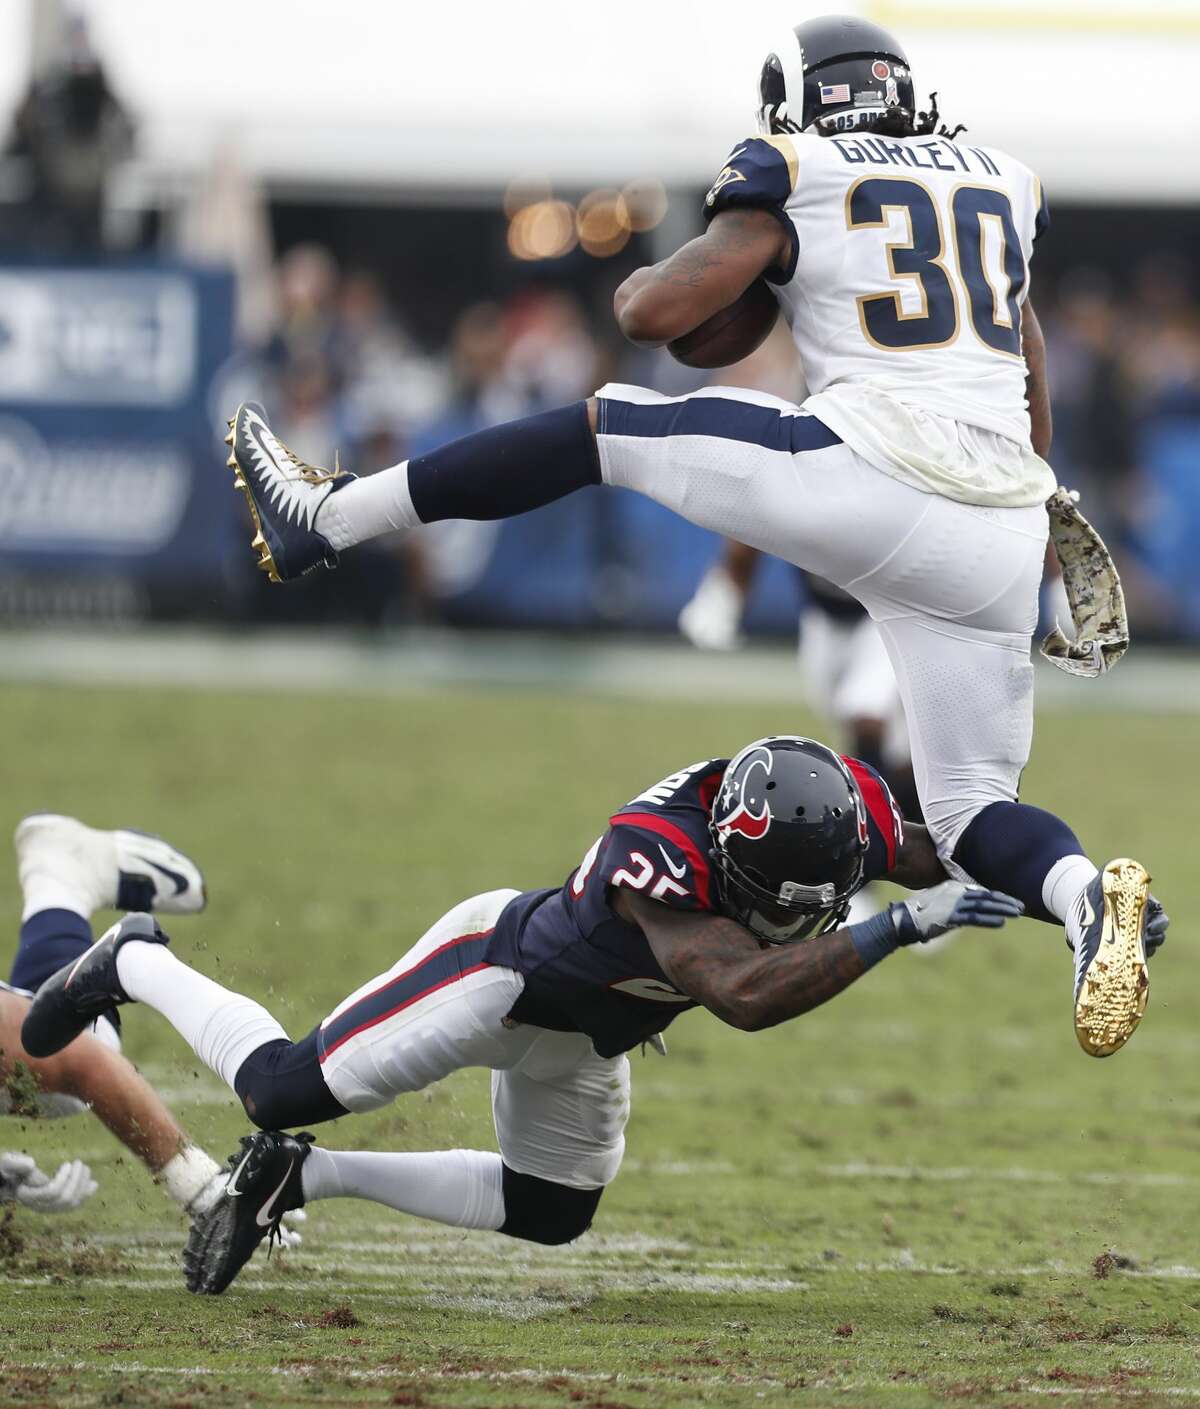 Los Angeles Rams running back Todd Gurley (30) leaps over Houston Texans cornerback Kareem Jackson (25) during the third quarter of an NFL football game at the Los Angeles Memorial Coliseum on Sunday, Nov. 12, 2017, in Los Angeles. ( Brett Coomer / Houston Chronicle )